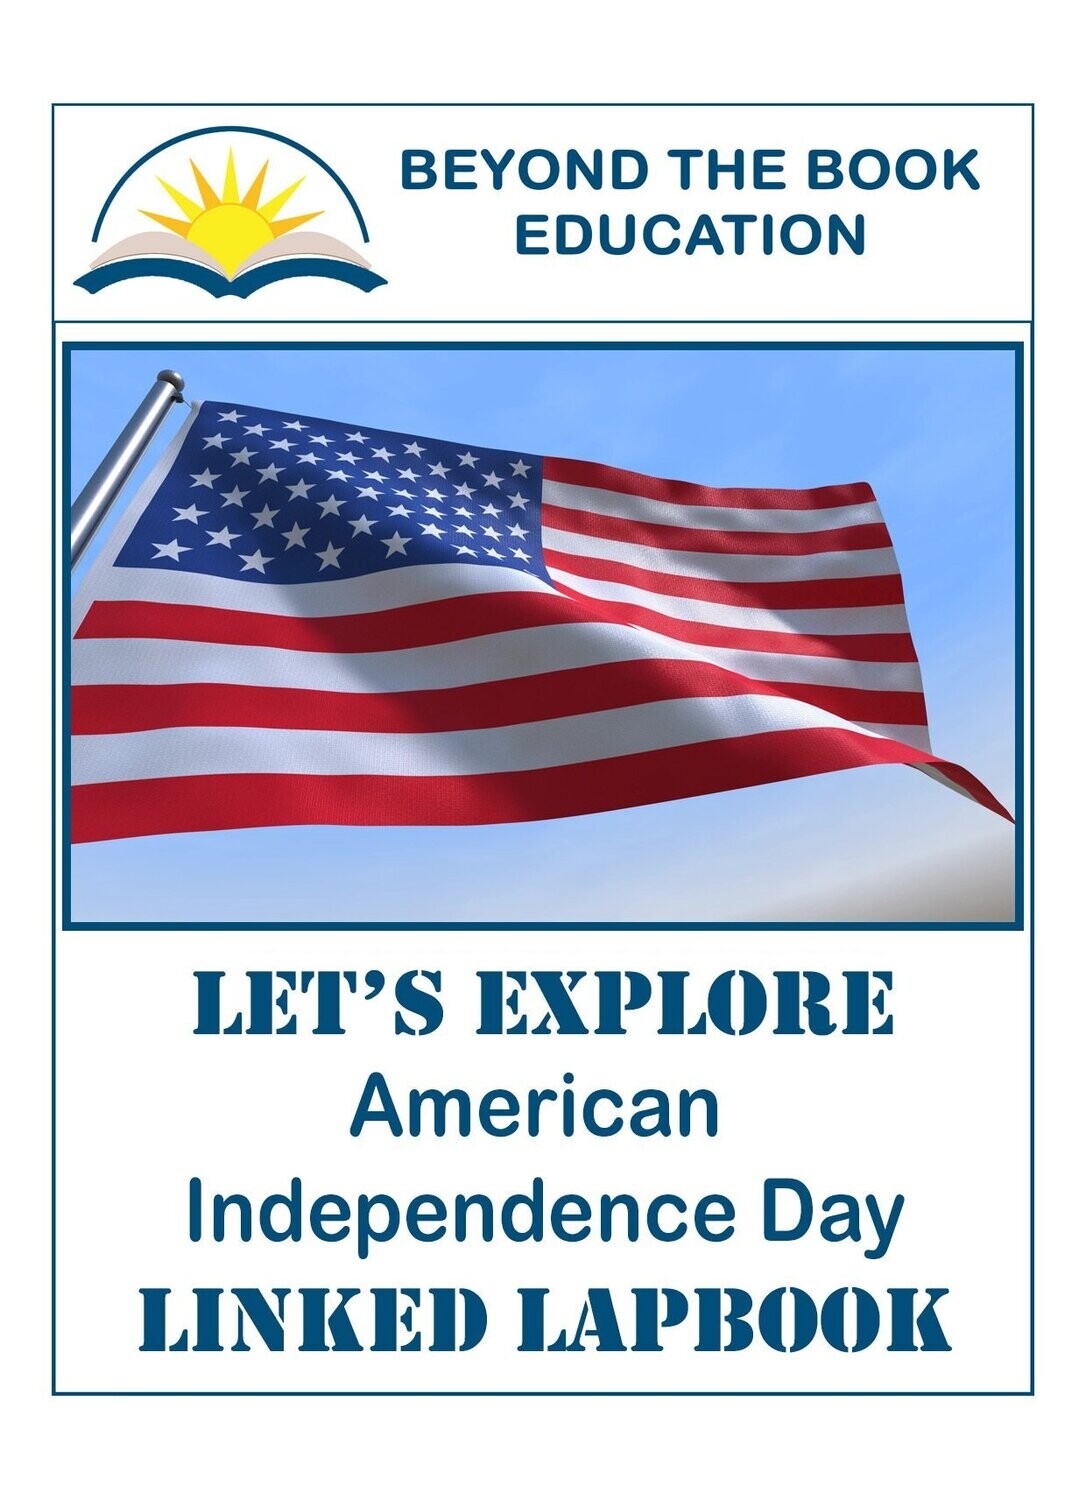 American Independence Day Linked Lapbook